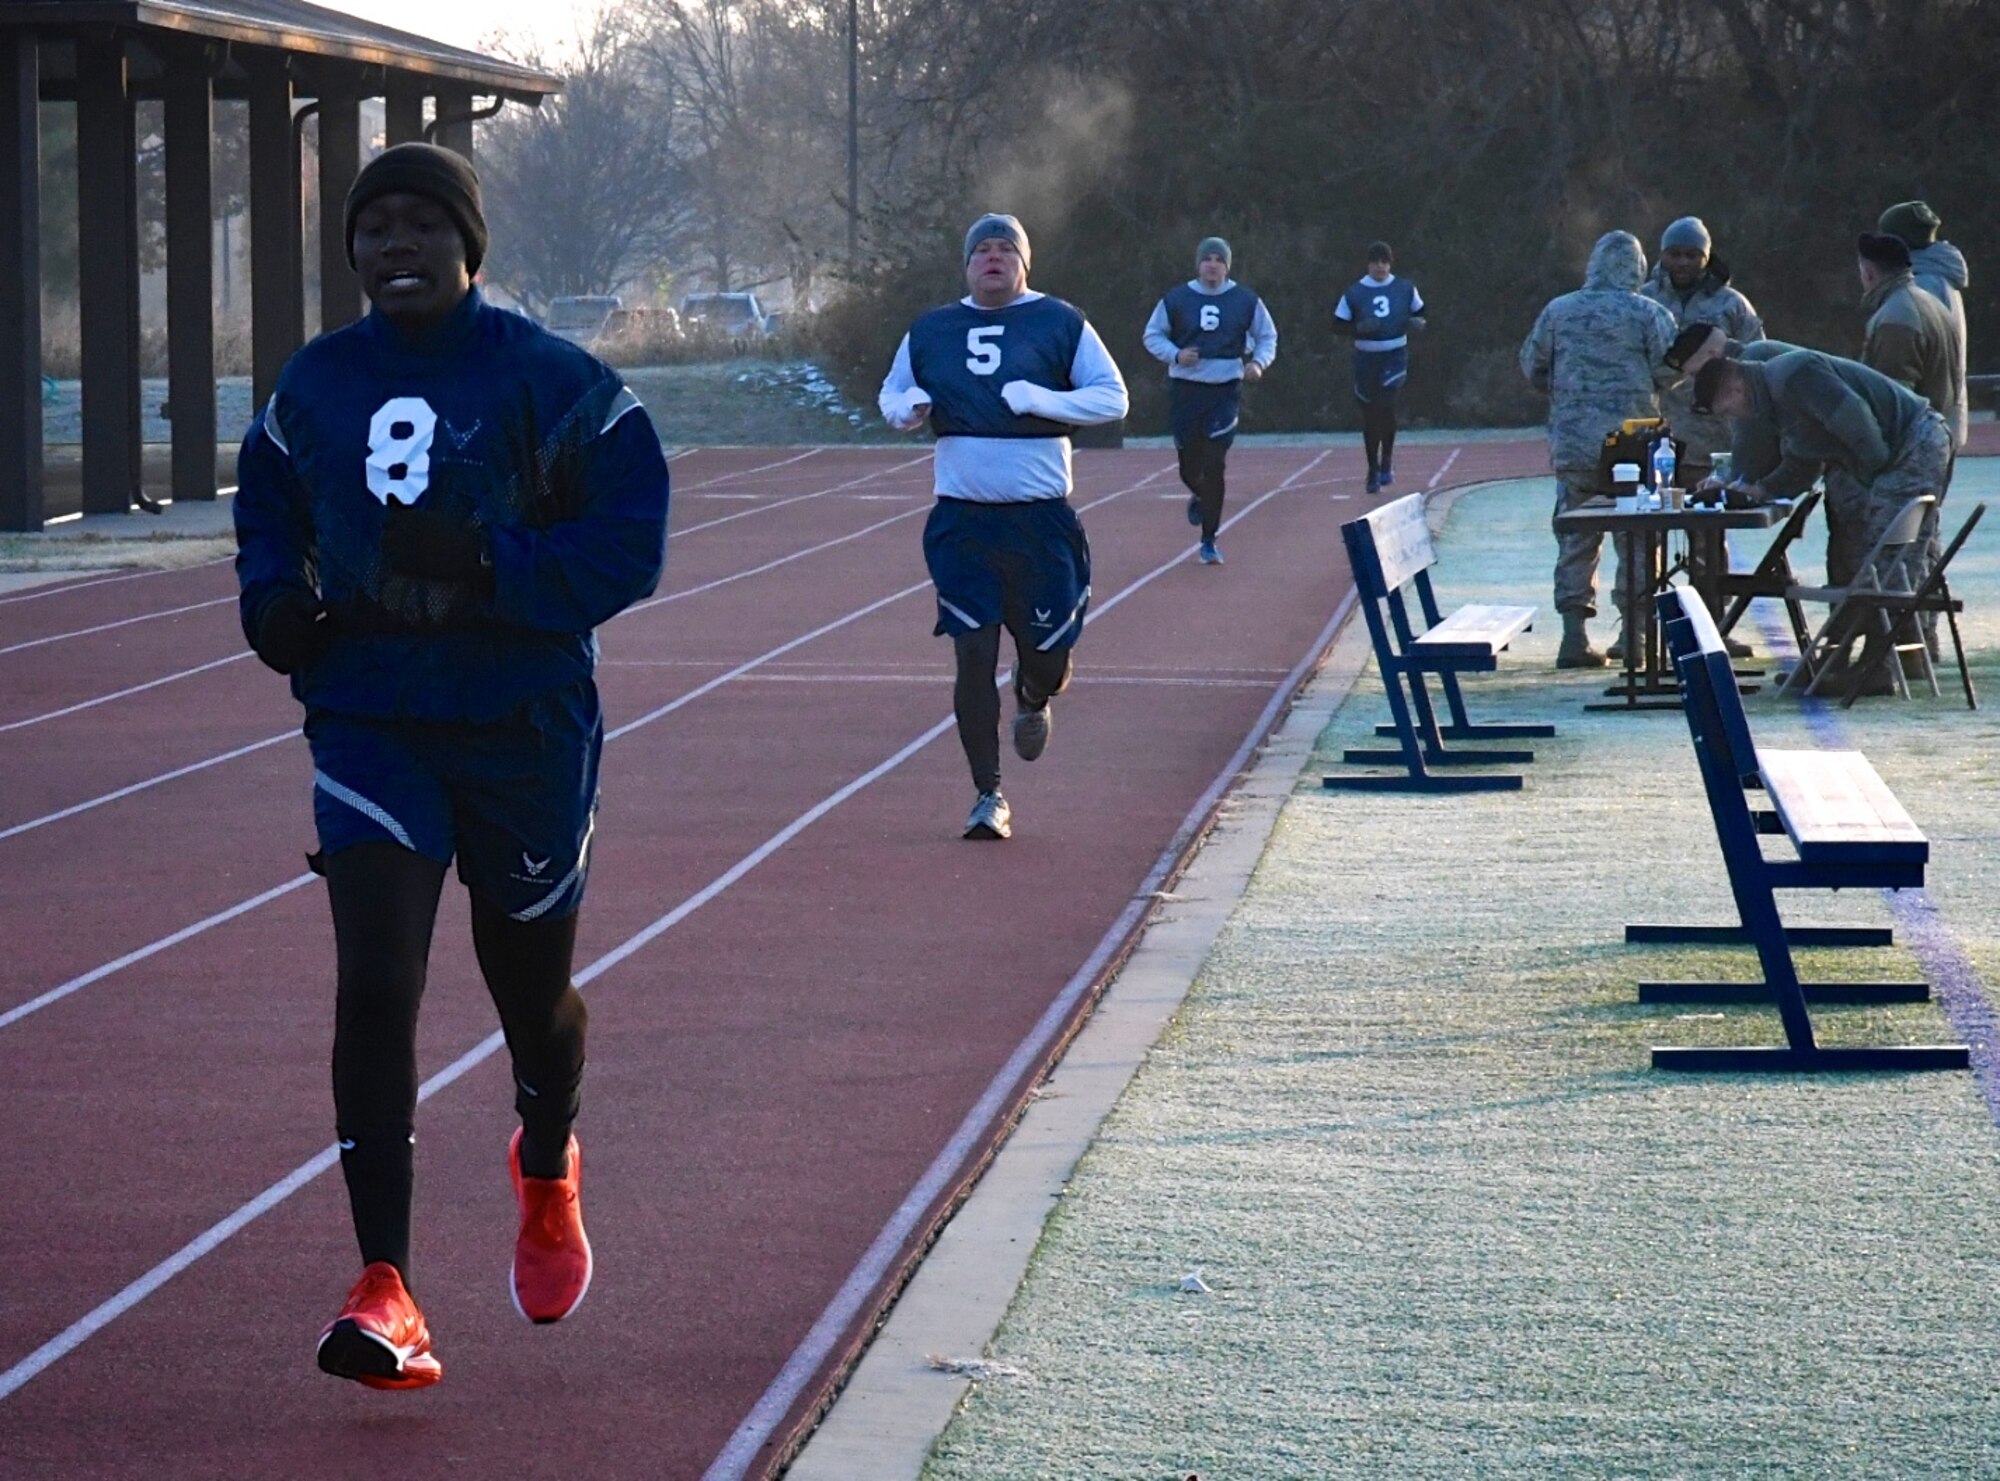 Airmen of the Air Force Reserve Command in Illinois complete lap three of six recently.  These 932nd Airlift Wing Citizen Airmen reservists performed the 1.5 mile run as part of the Air Force fitness assessment November 16, 2019, at Scott Air Force Base, Illinois. The weather was a bit chilly at 6:30 a.m., but winds were calm and pleasantly warmed up once the sun rose . Reservists from more than 30 states come to train each month at the Illinois C-40C unit known among reserve units as the "Gateway Wing". Fitness test also include pushups, sit-ups and height and weight measurements. Staying fit throughout the year helps keep Airmen ready for any future challenges.  (U.S. Air Force photo by Lt. Col. Stan Paregien)